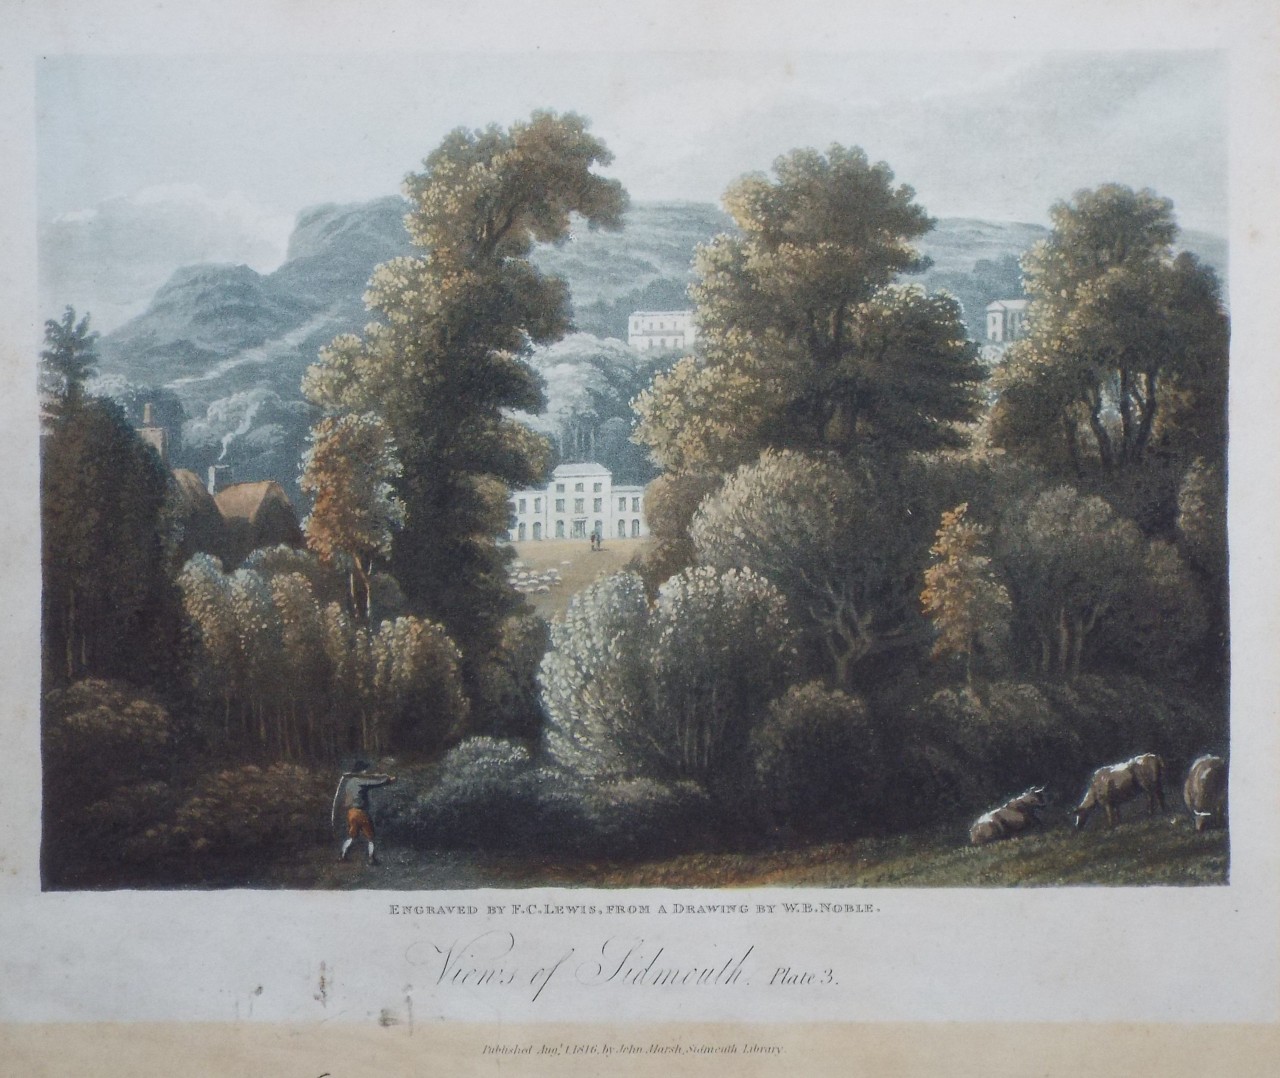 Aquatint - Views of Sidmouth. Plate 3.  - Lewis